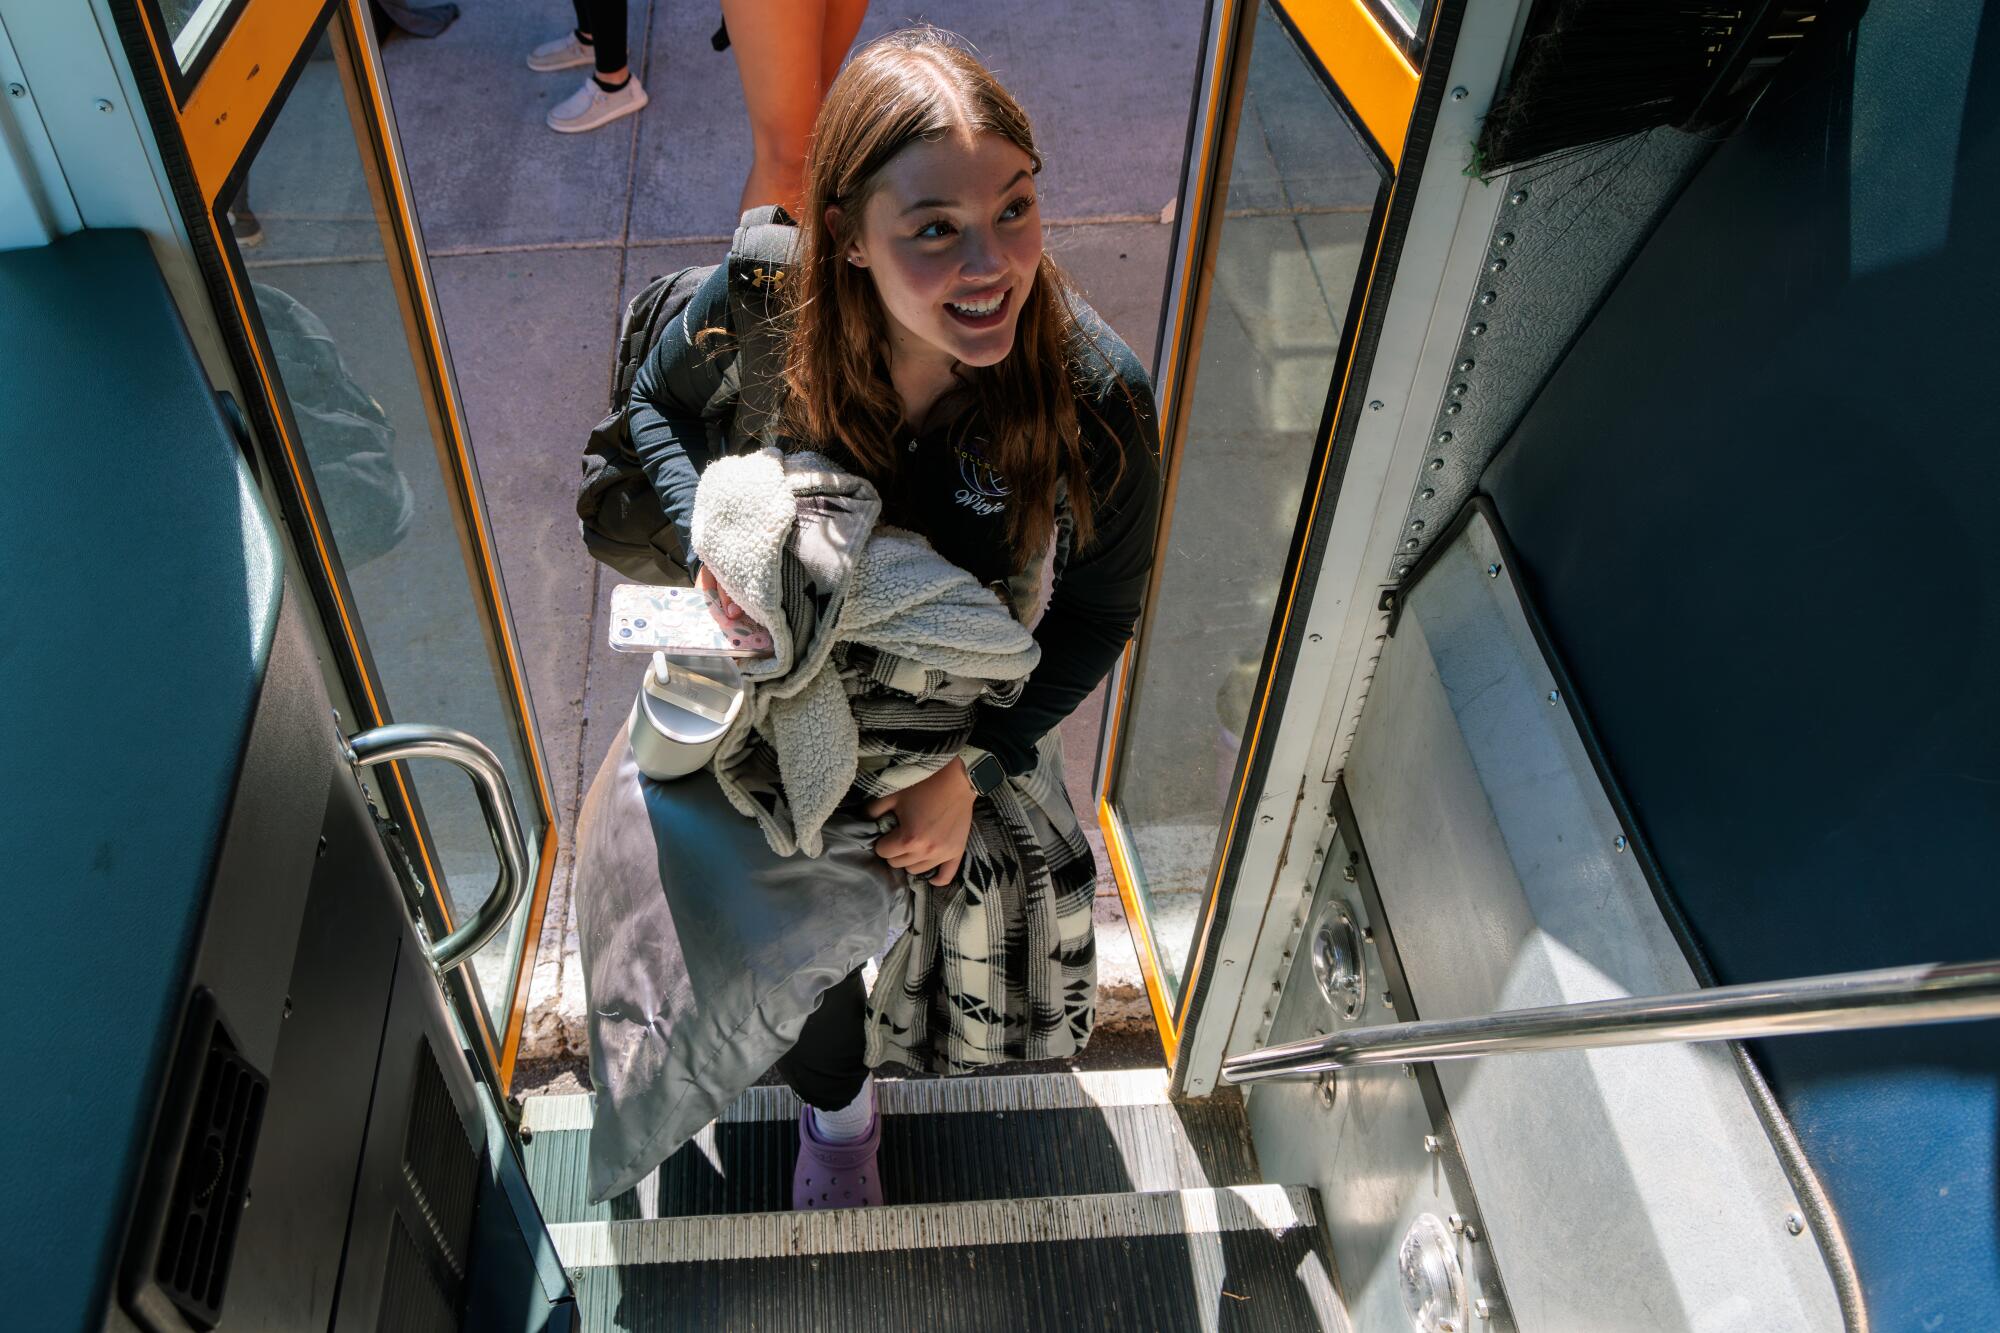 A girl, seen from the driver's point of view, boards a bus.